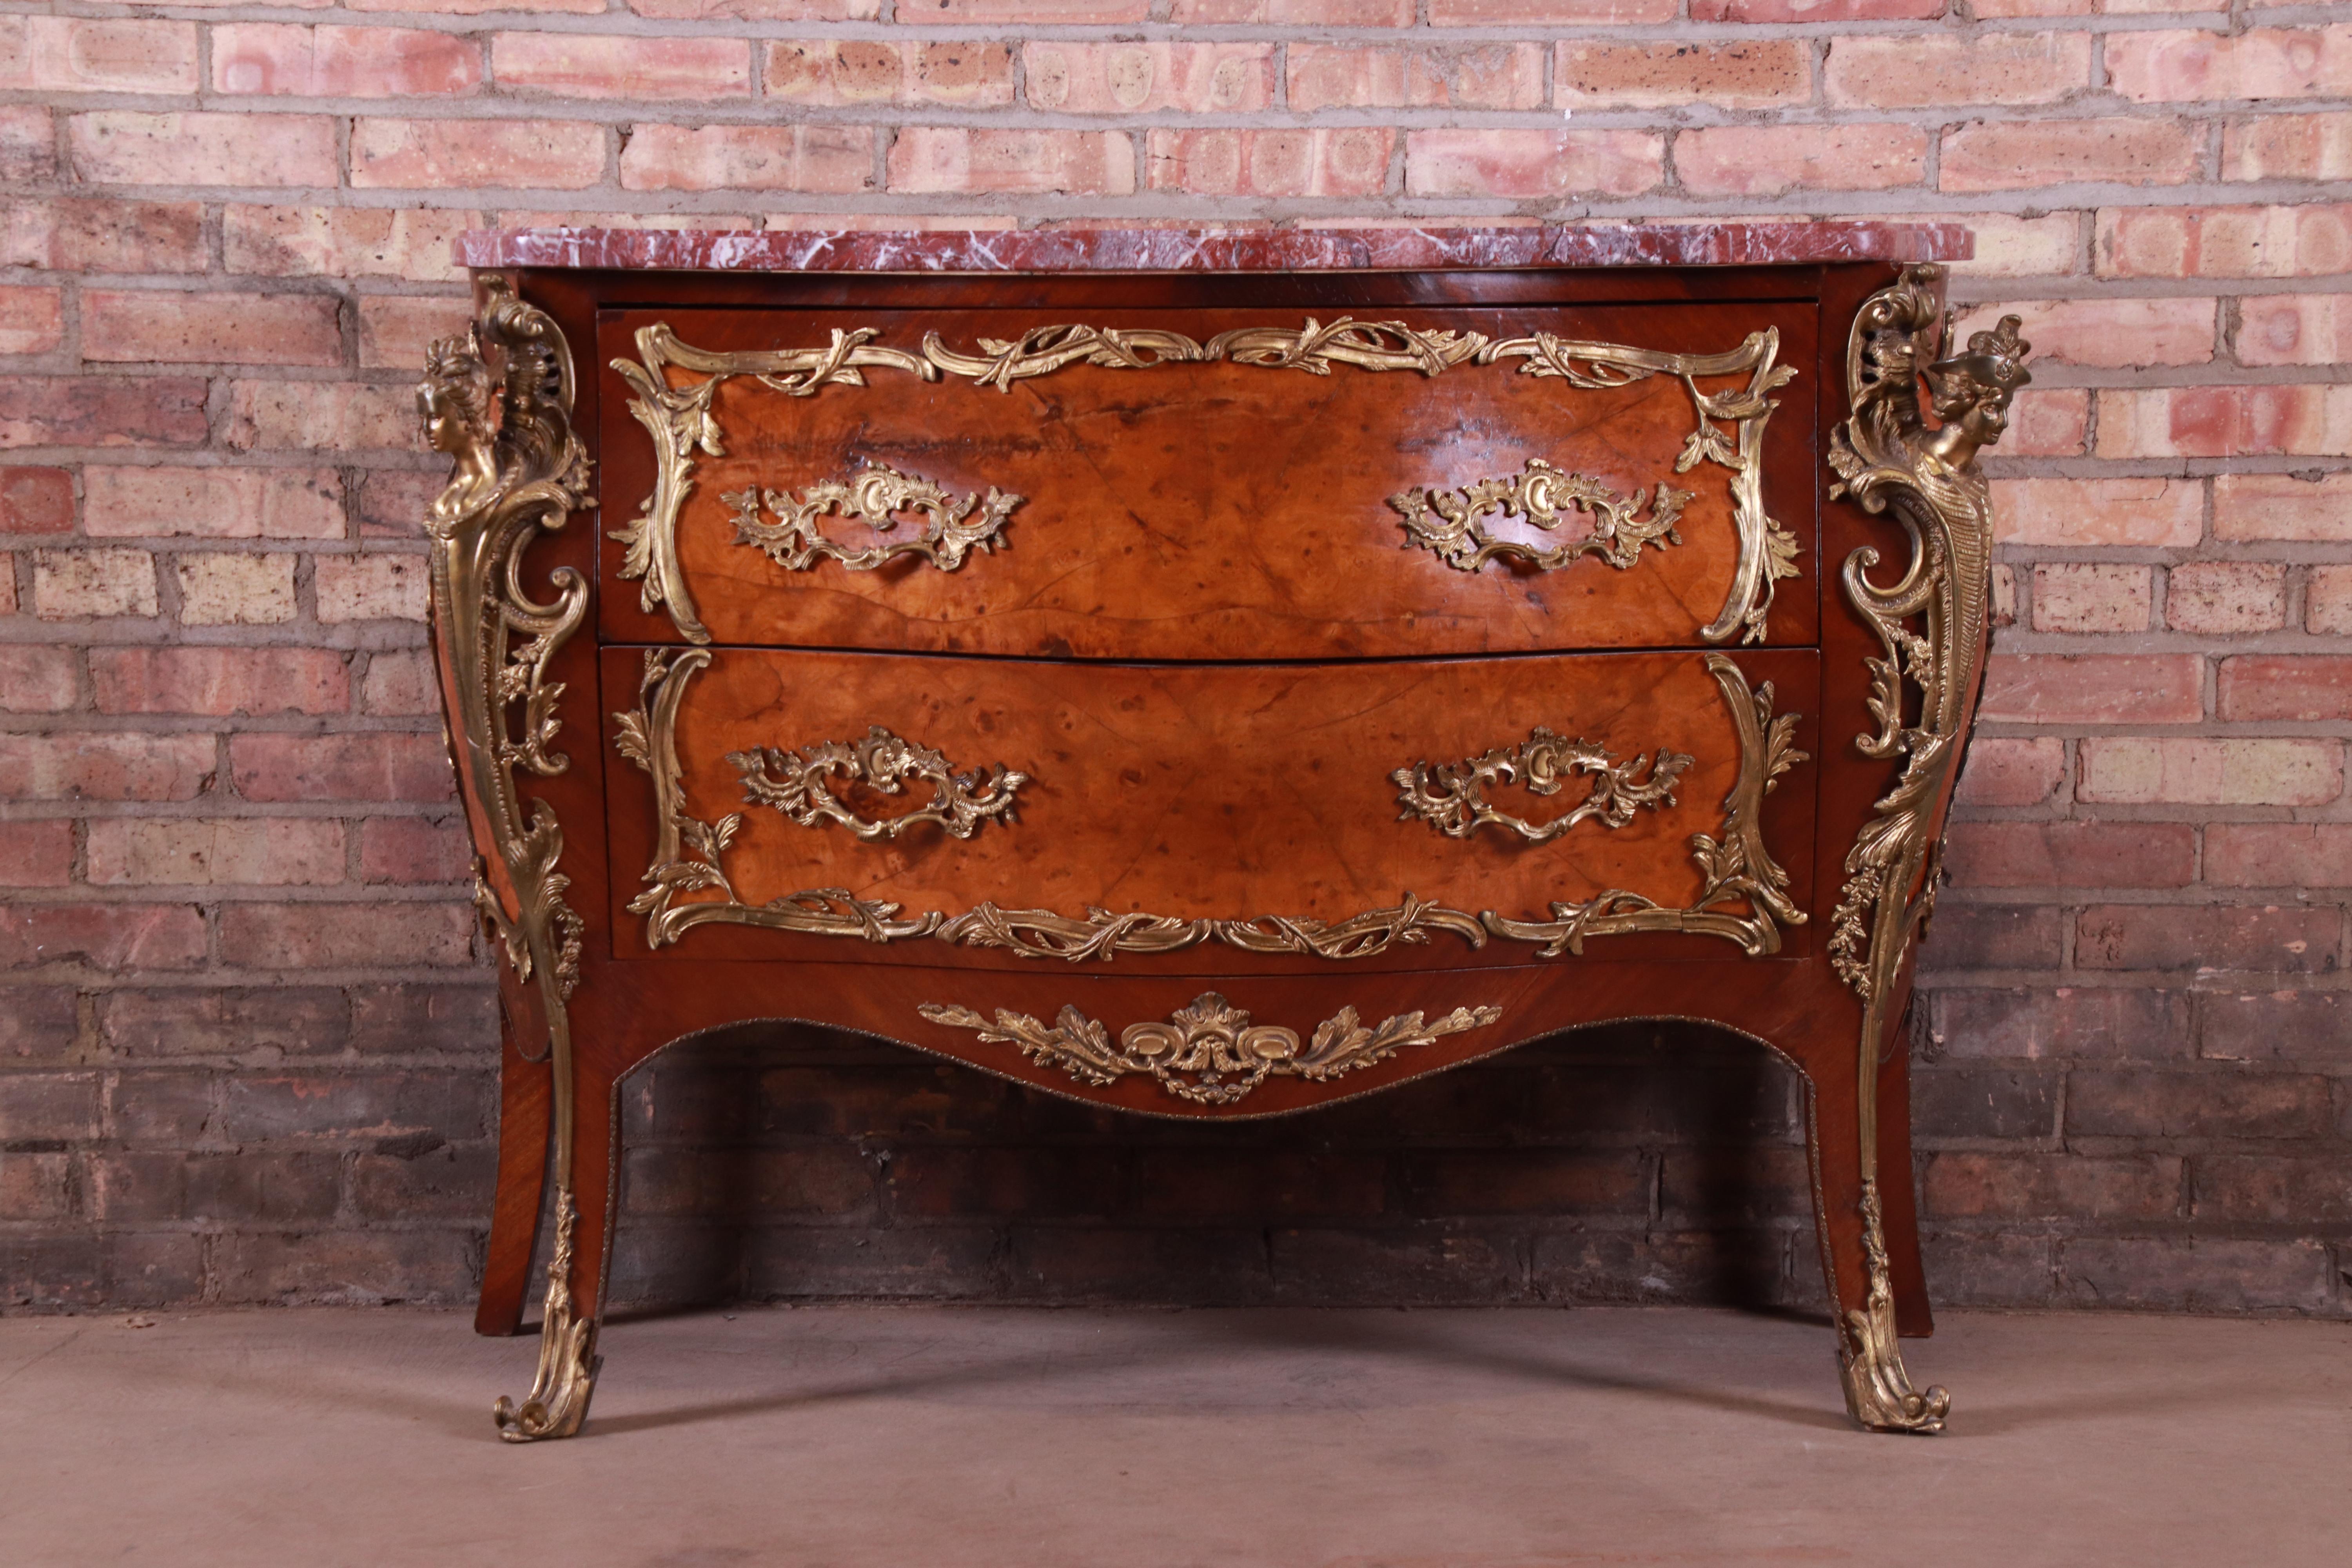 An exceptional antique French Bombay commode or chest of drawers

France, early 20th century

Mahogany, with inlaid burled walnut, mounted bronze ormolu, and beveled marble top.

Measures: 46.25